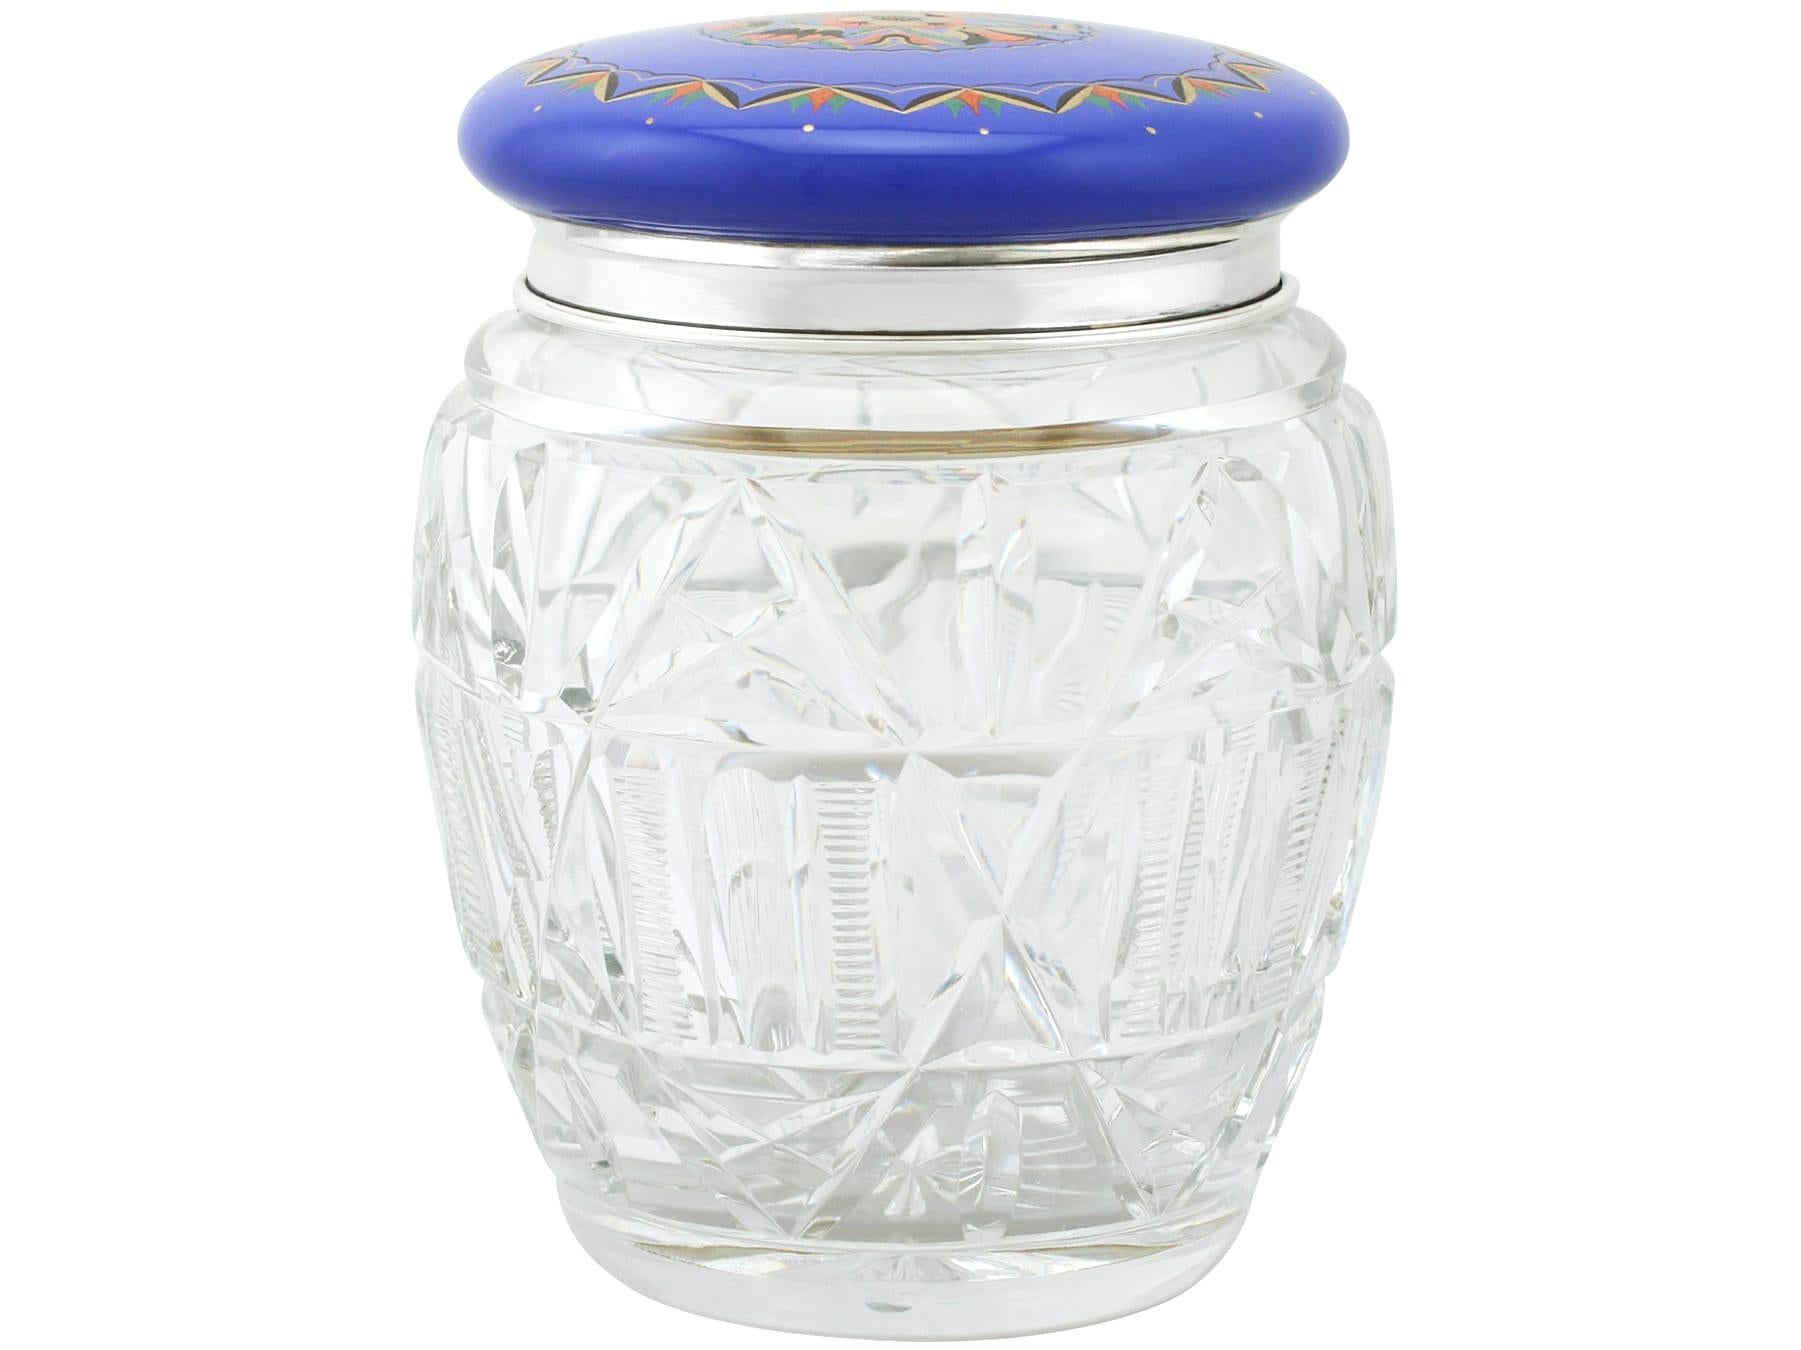 An exceptional, fine and impressive antique George V English sterling silver, cut-glass and enamel biscuit barrel; an addition to our silver mounted glass collection

This exceptional antique George V cut-glass biscuit barrel has a circular rounded